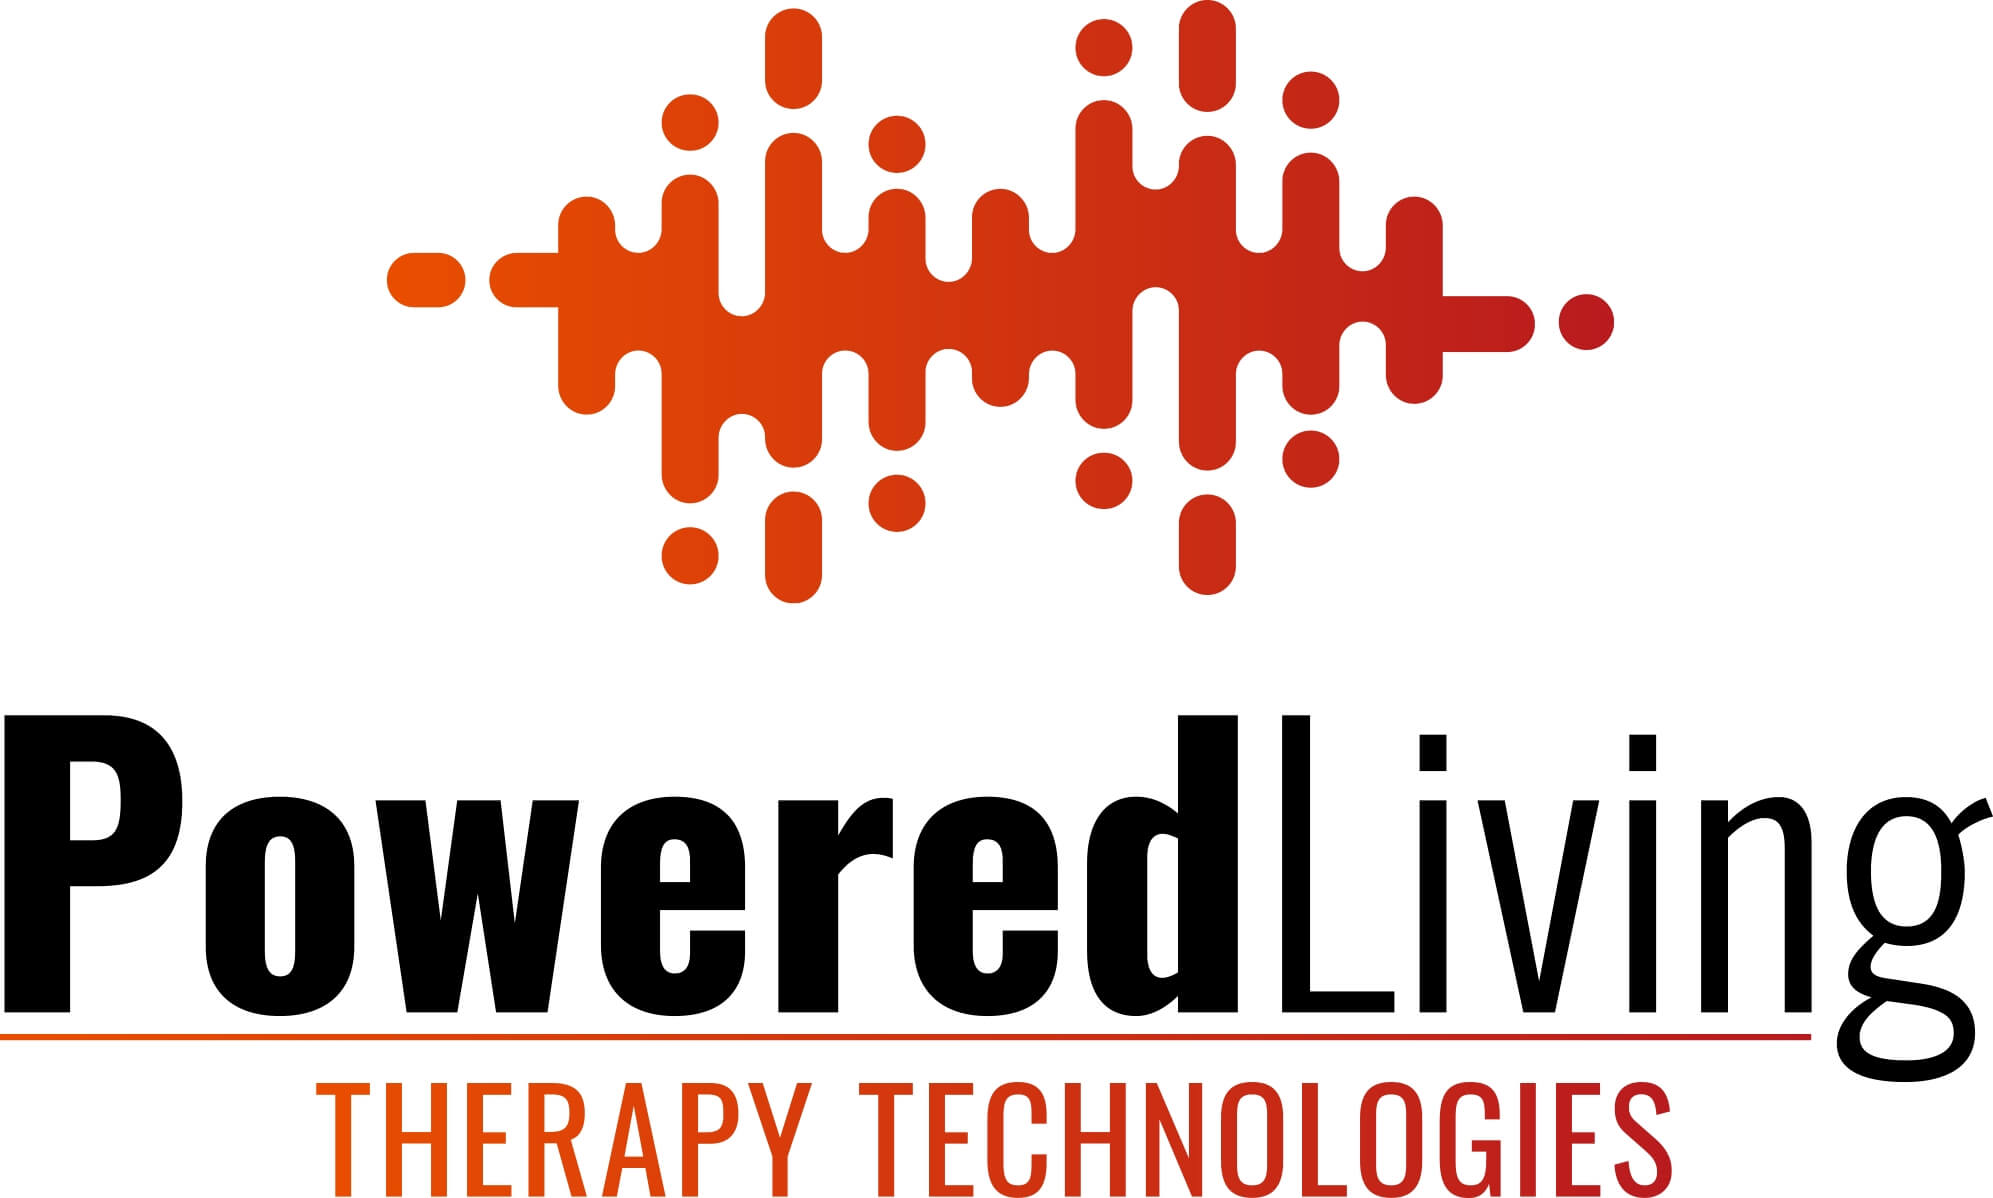 Powered Living Therapy Technologies